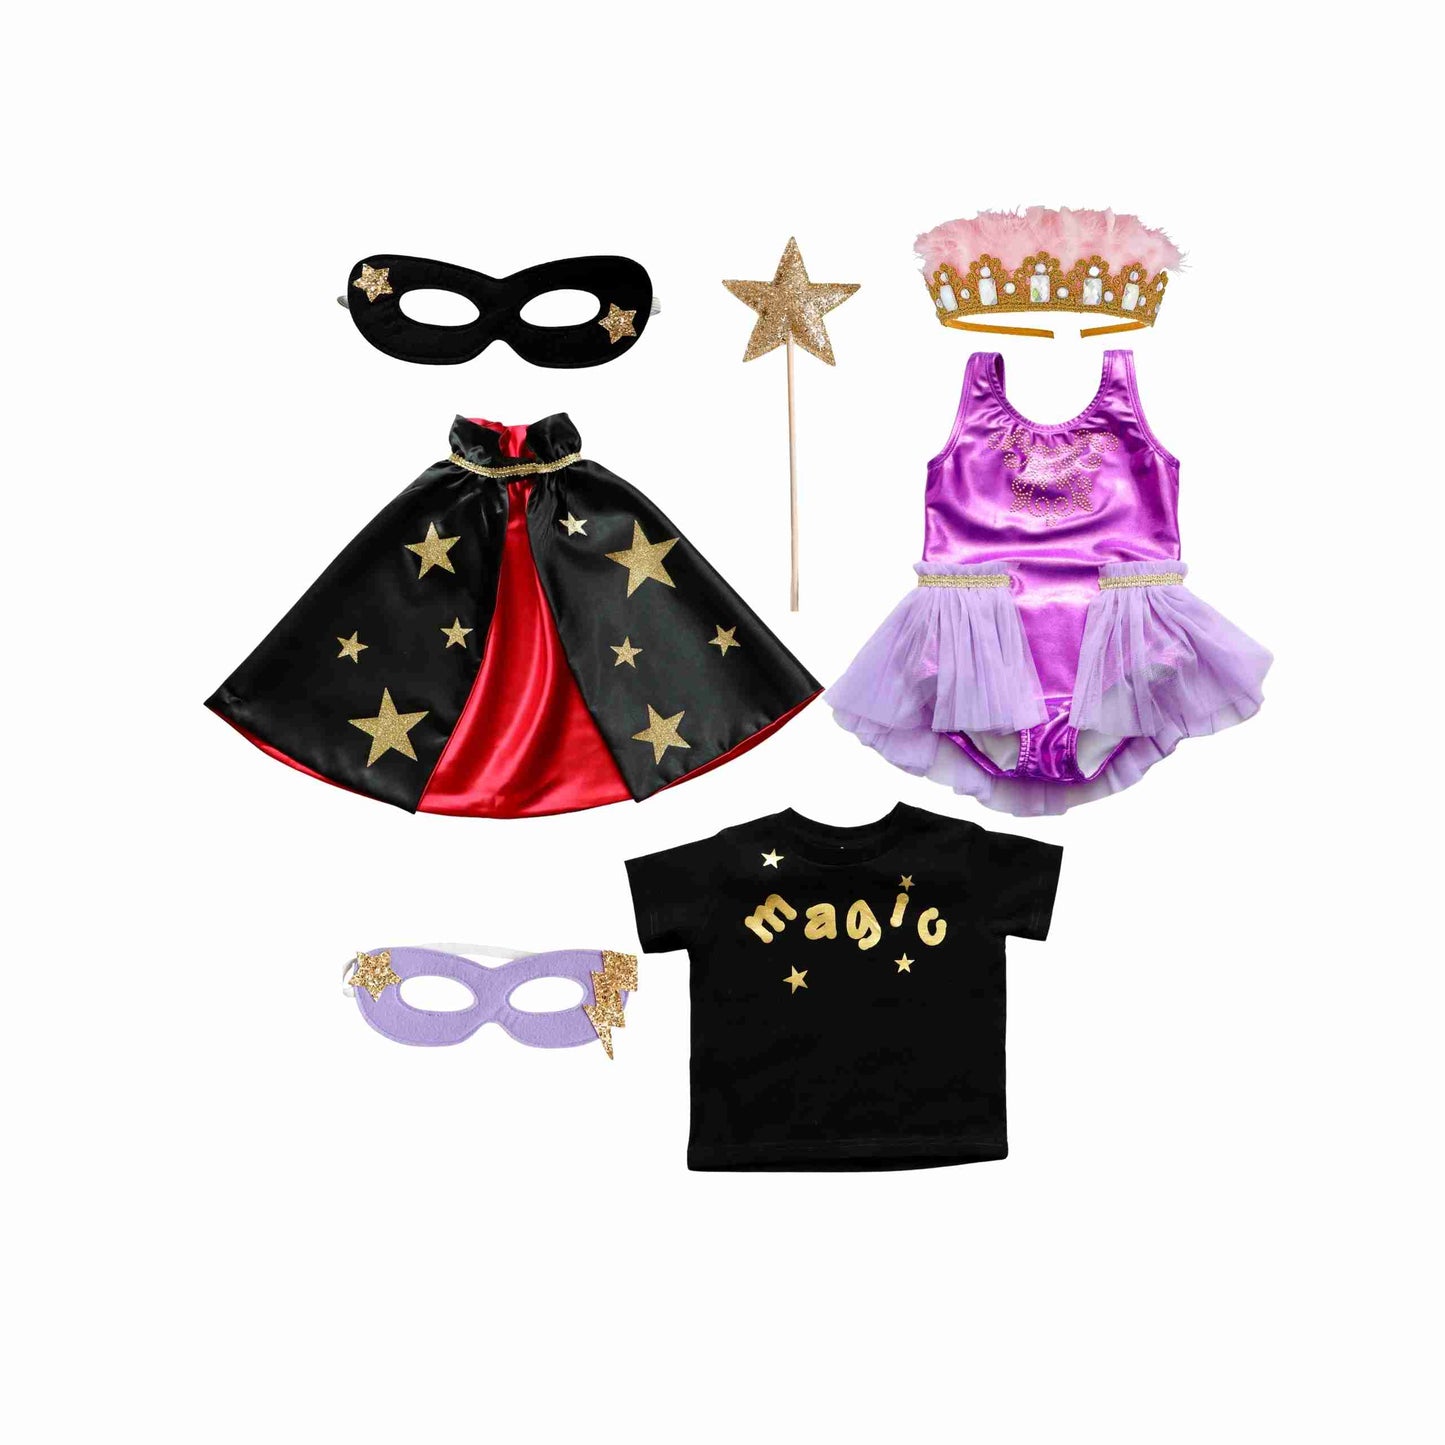 a little girl's costume and accessories are shown